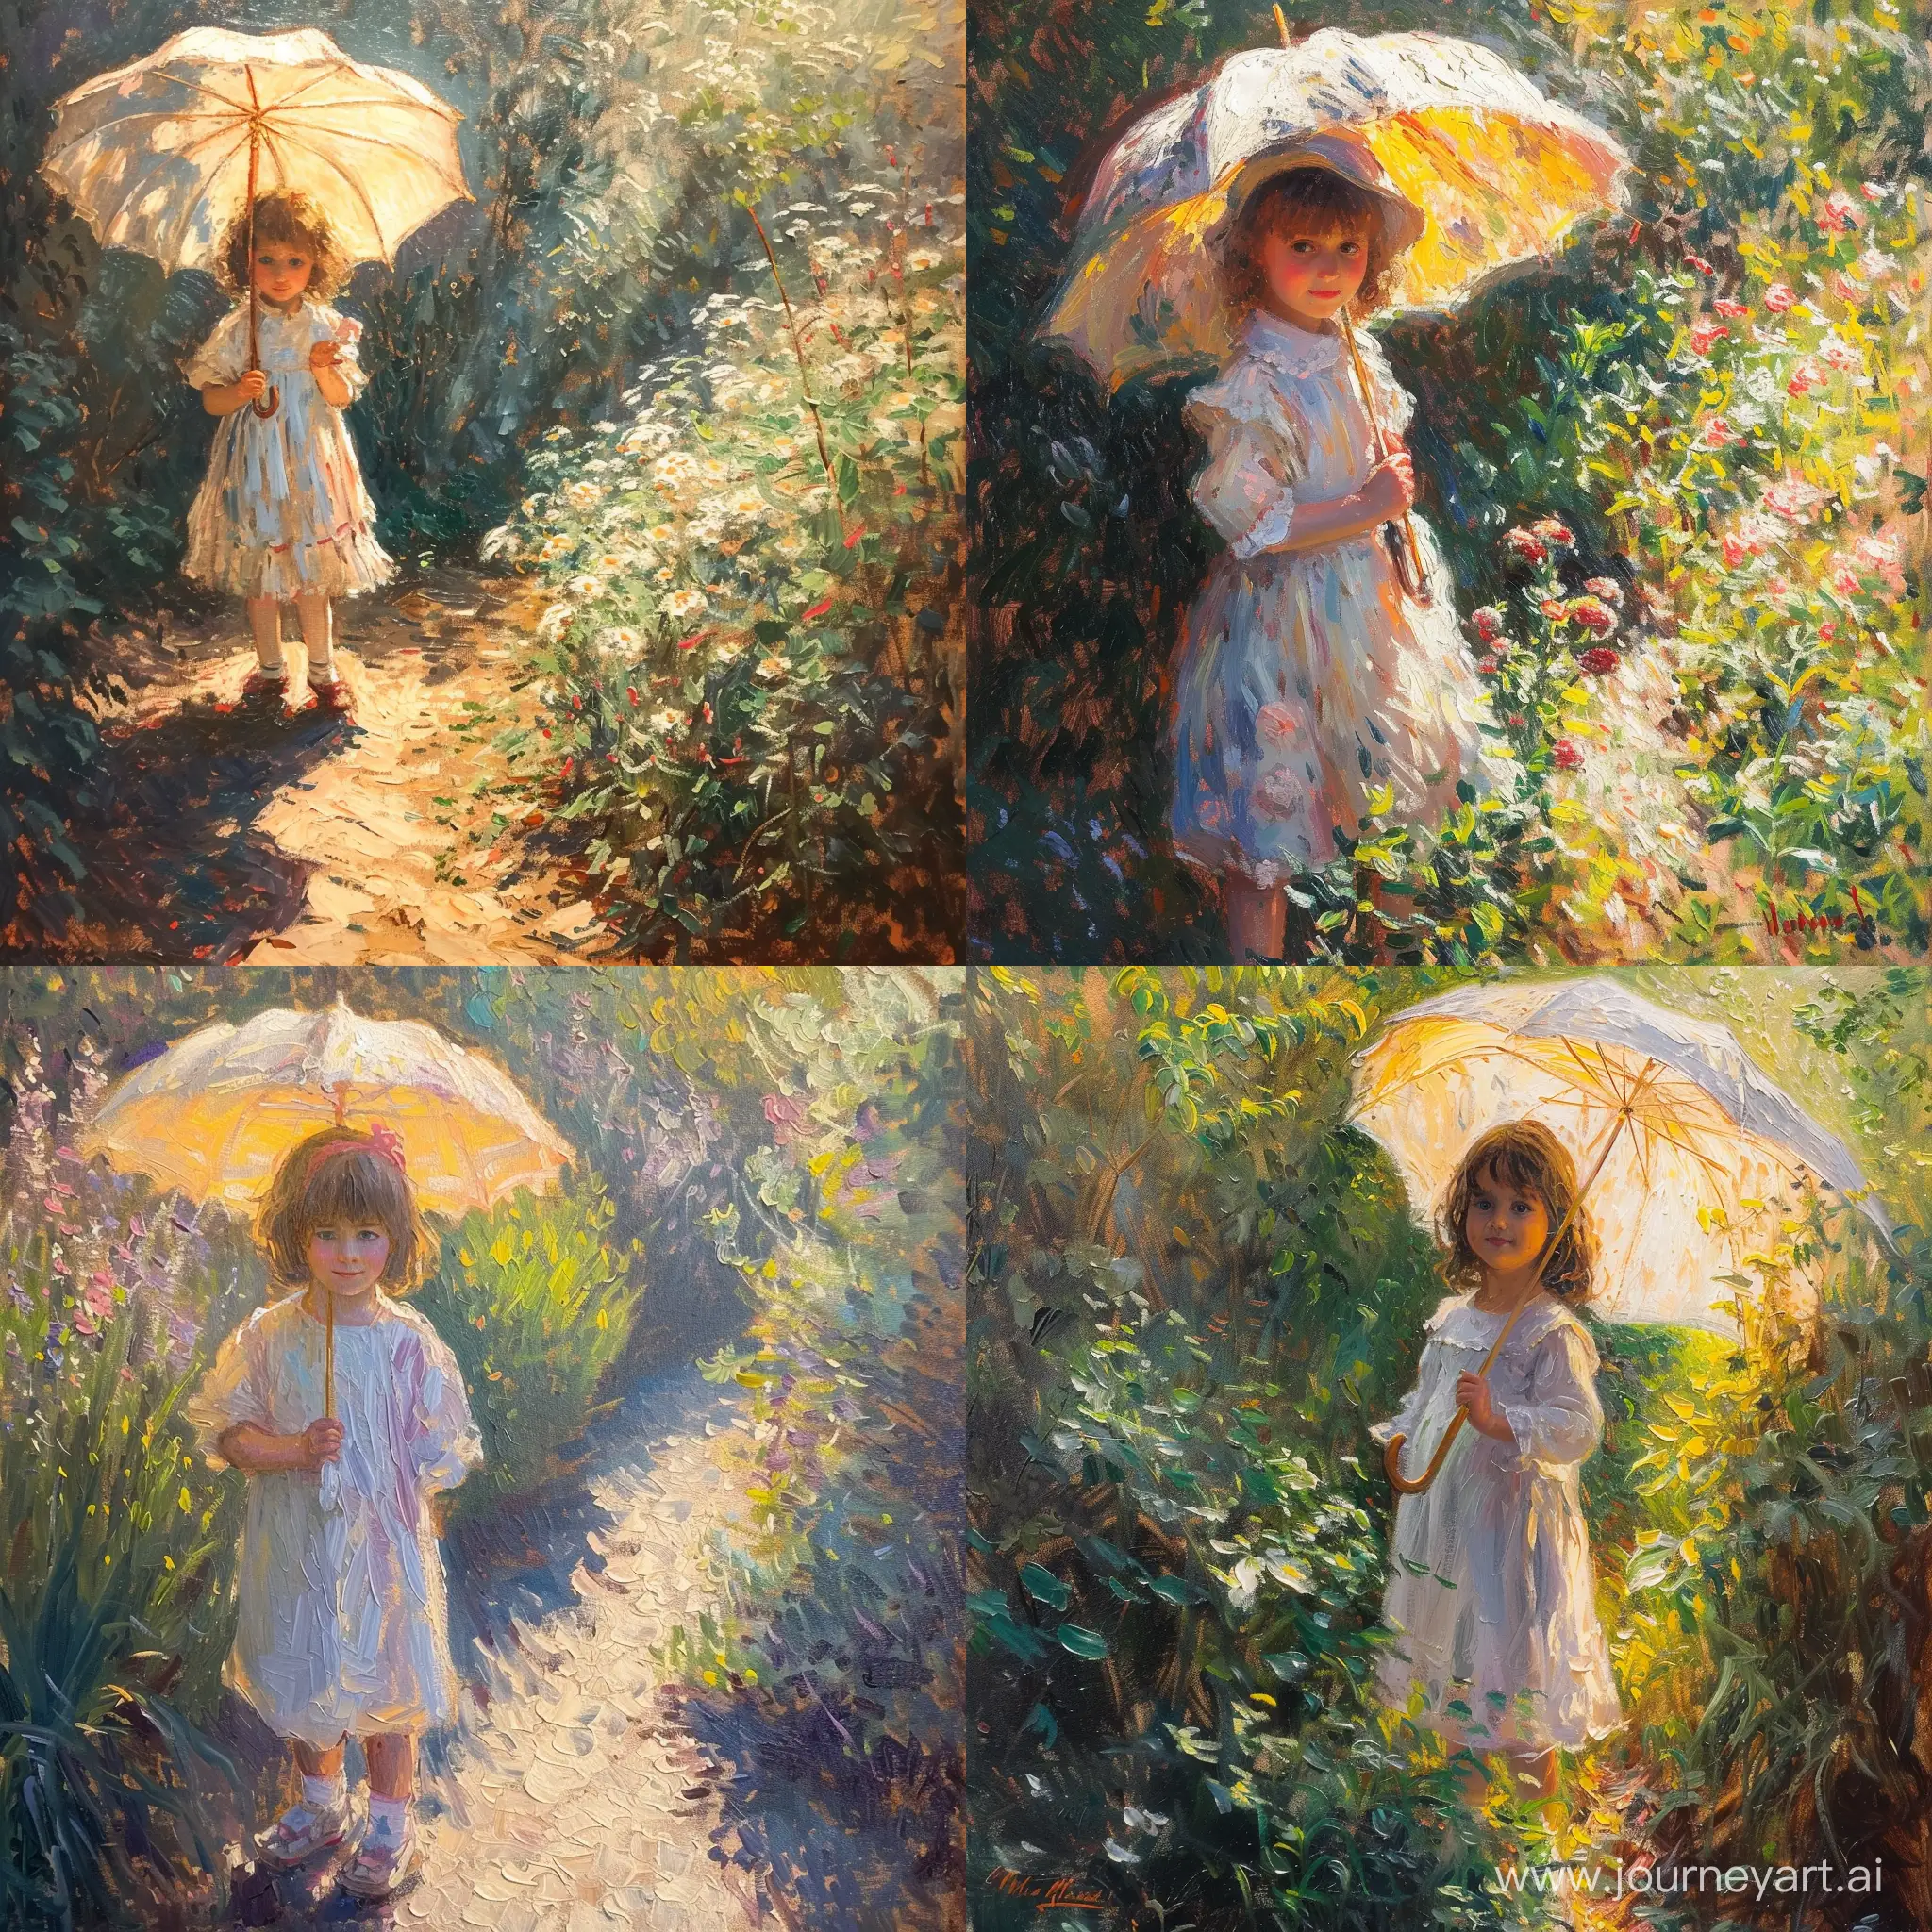 Impressionist painting in the style of Claude Monet, a portrait of a young girl with a parasol standing in a sunlit garden --turbo 